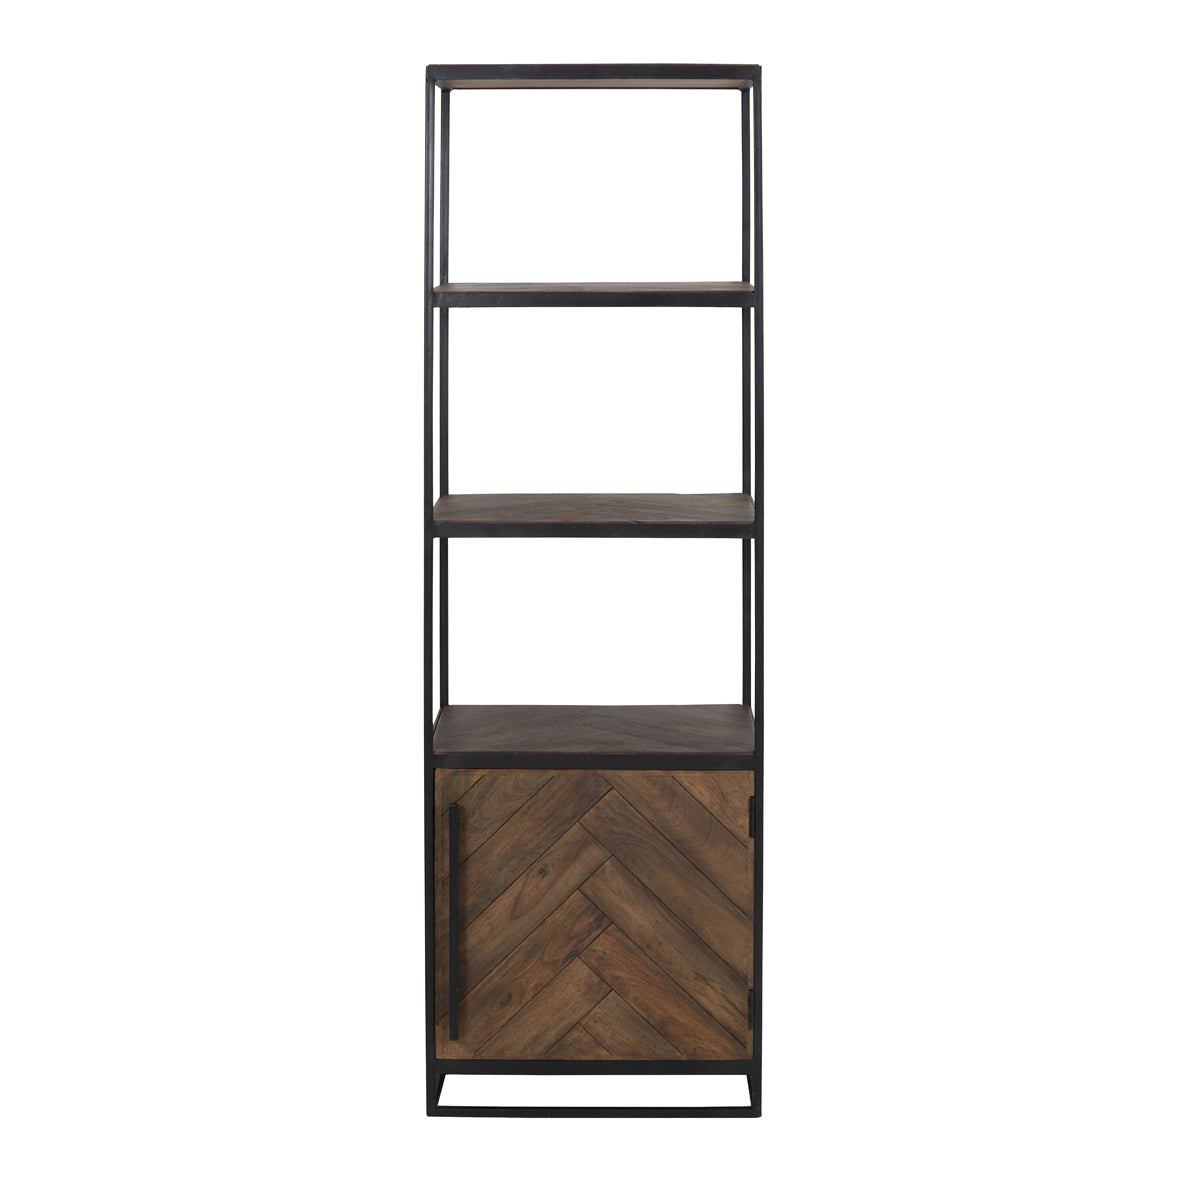 Yucata Shelving Cabinet with Black Metal